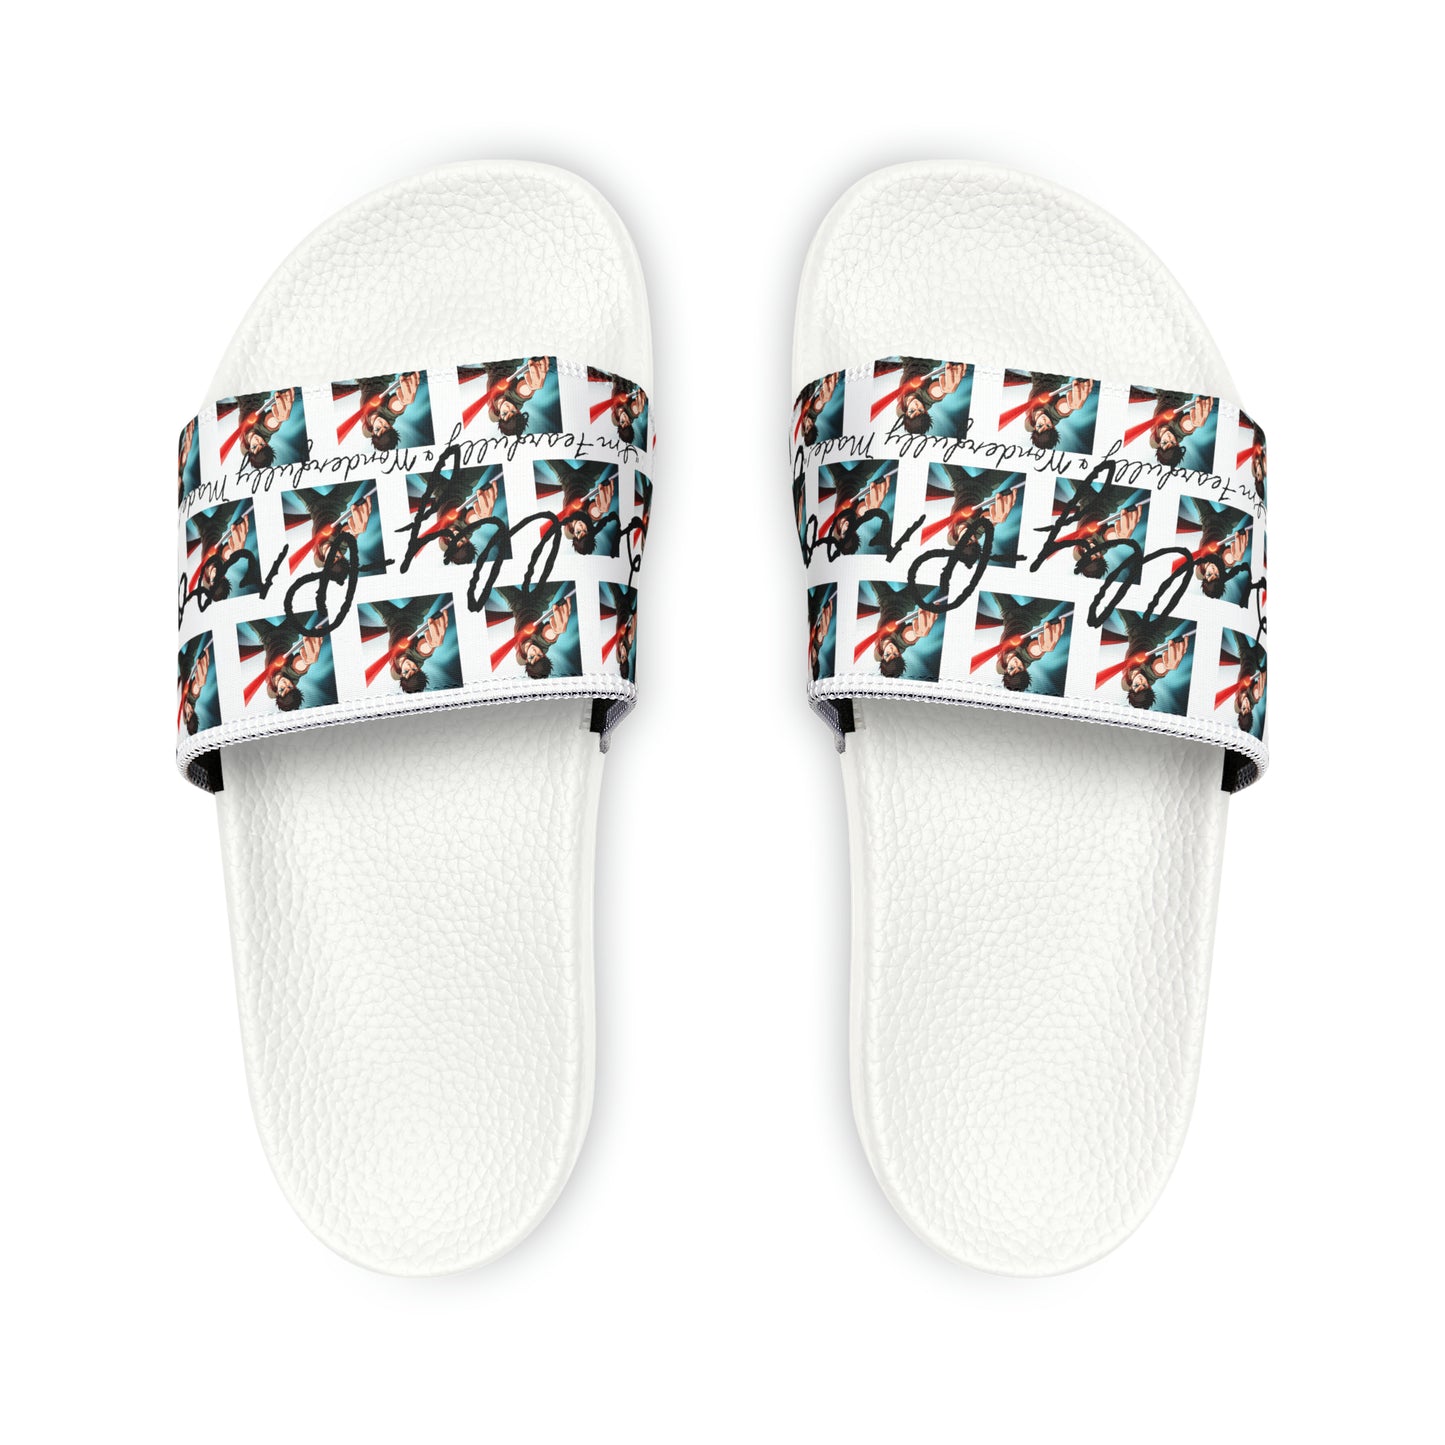 Bulyy-Proof Anime By Micah Youth PU Slide Sandals